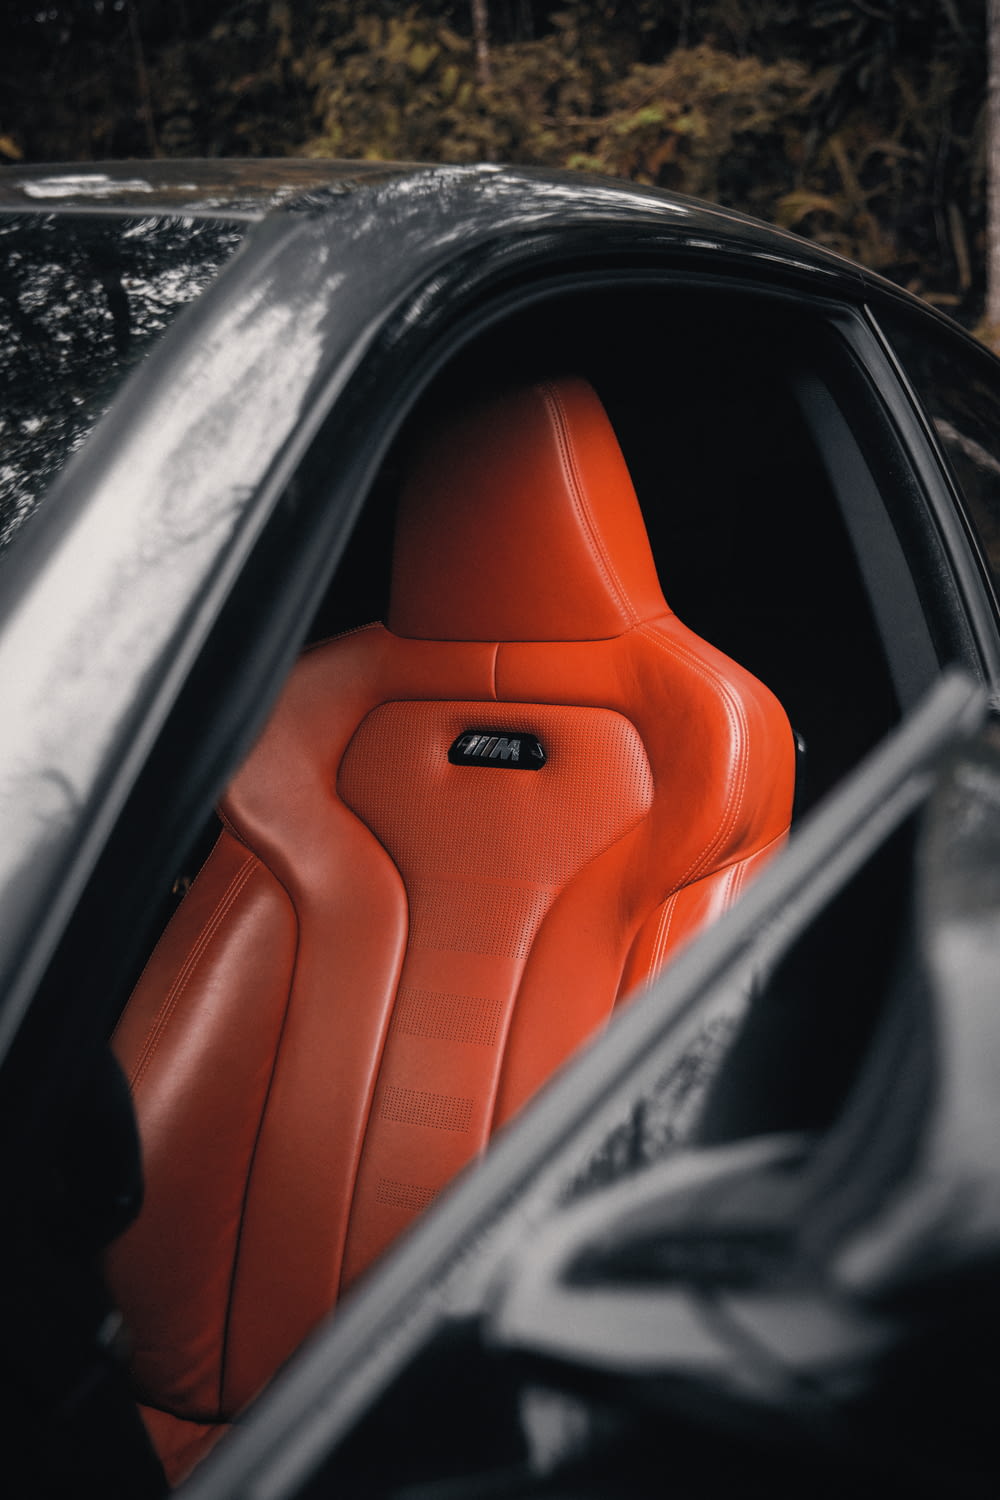 the interior of a car with a red seat